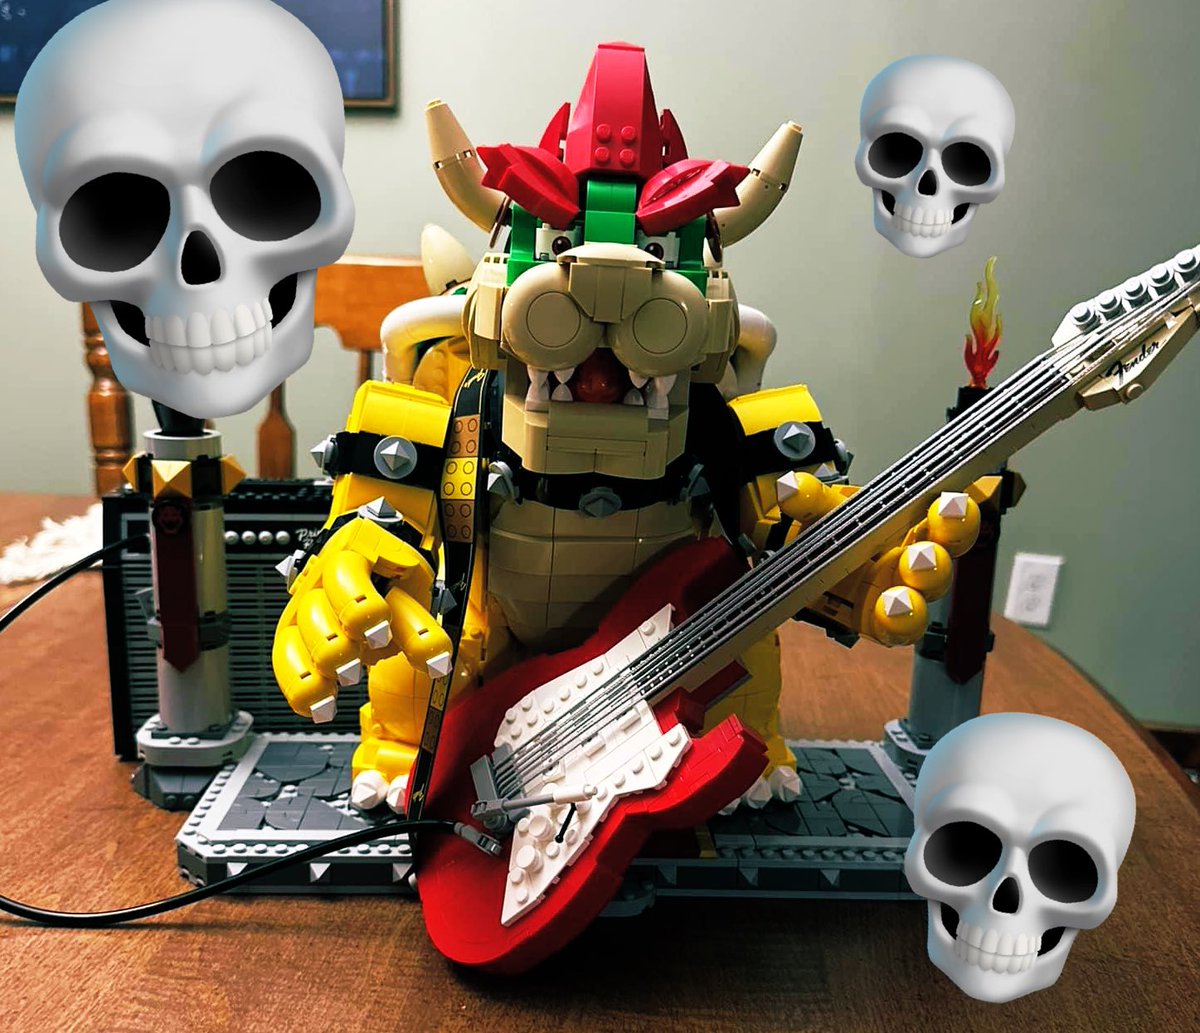 Bowser looks pretty rad with the #LEGO #FenderStratocaster! 🤟🤟💀💀

#LEGOSuperMario #SuperMario #Bowser #Fender #LEGOFender #Stratocaster #LEGOIdeas